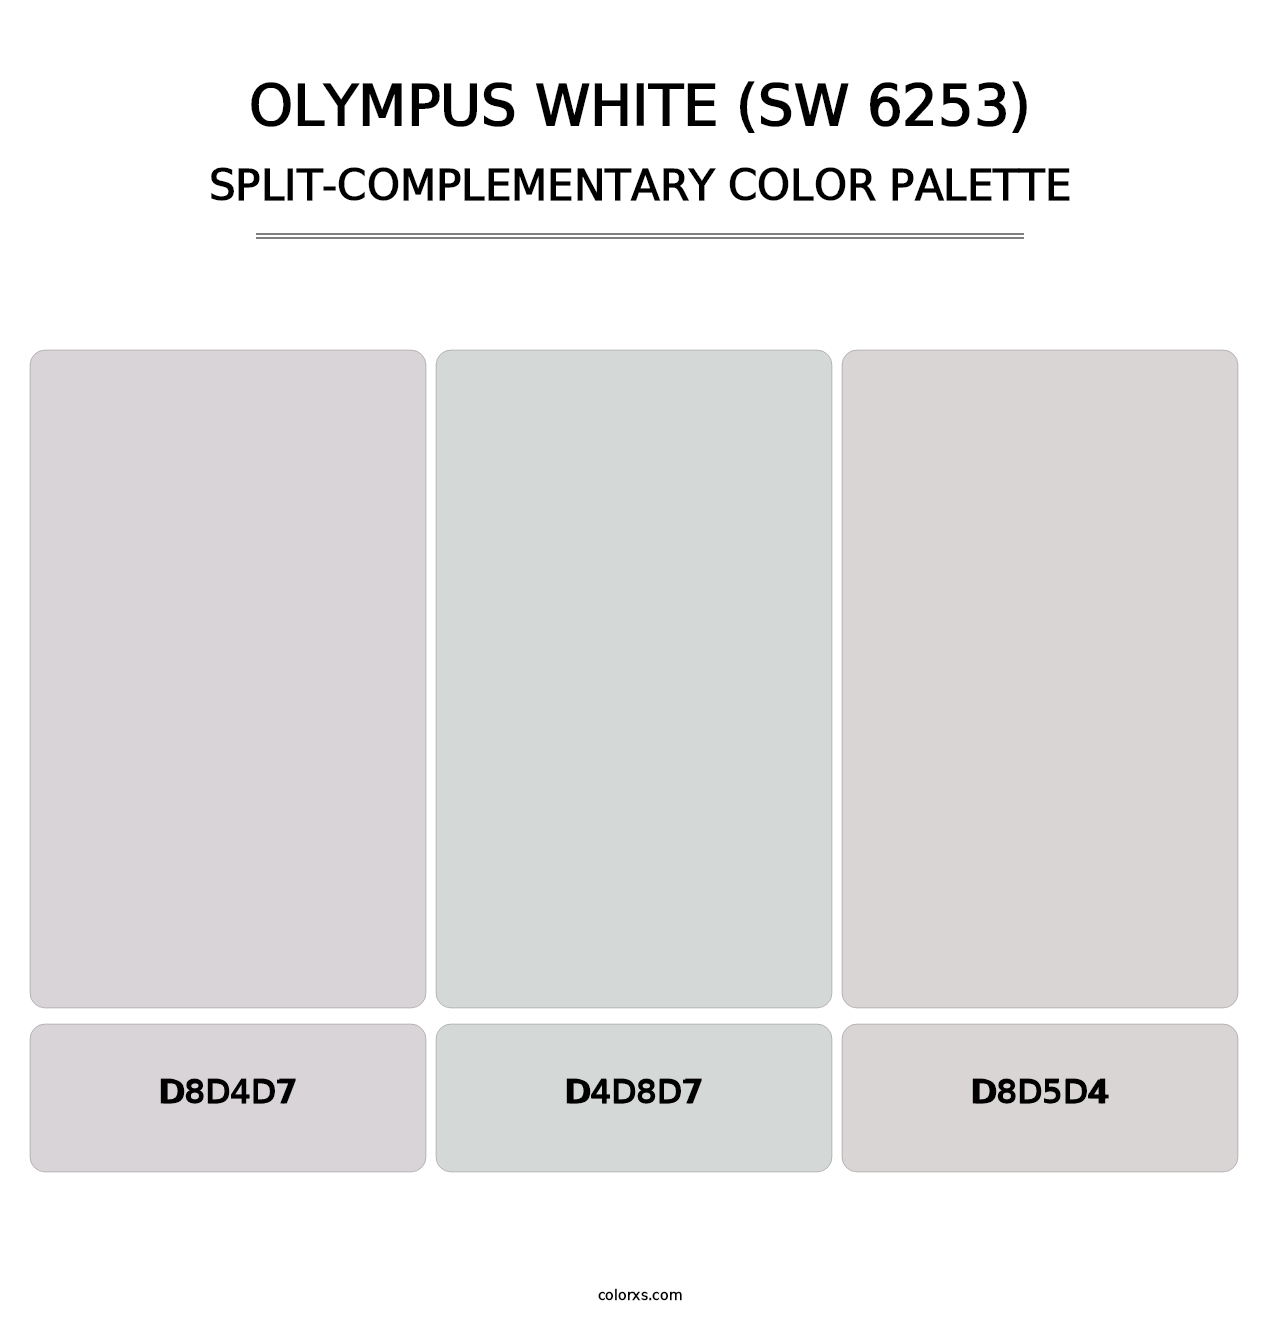 Olympus White (SW 6253) - Split-Complementary Color Palette